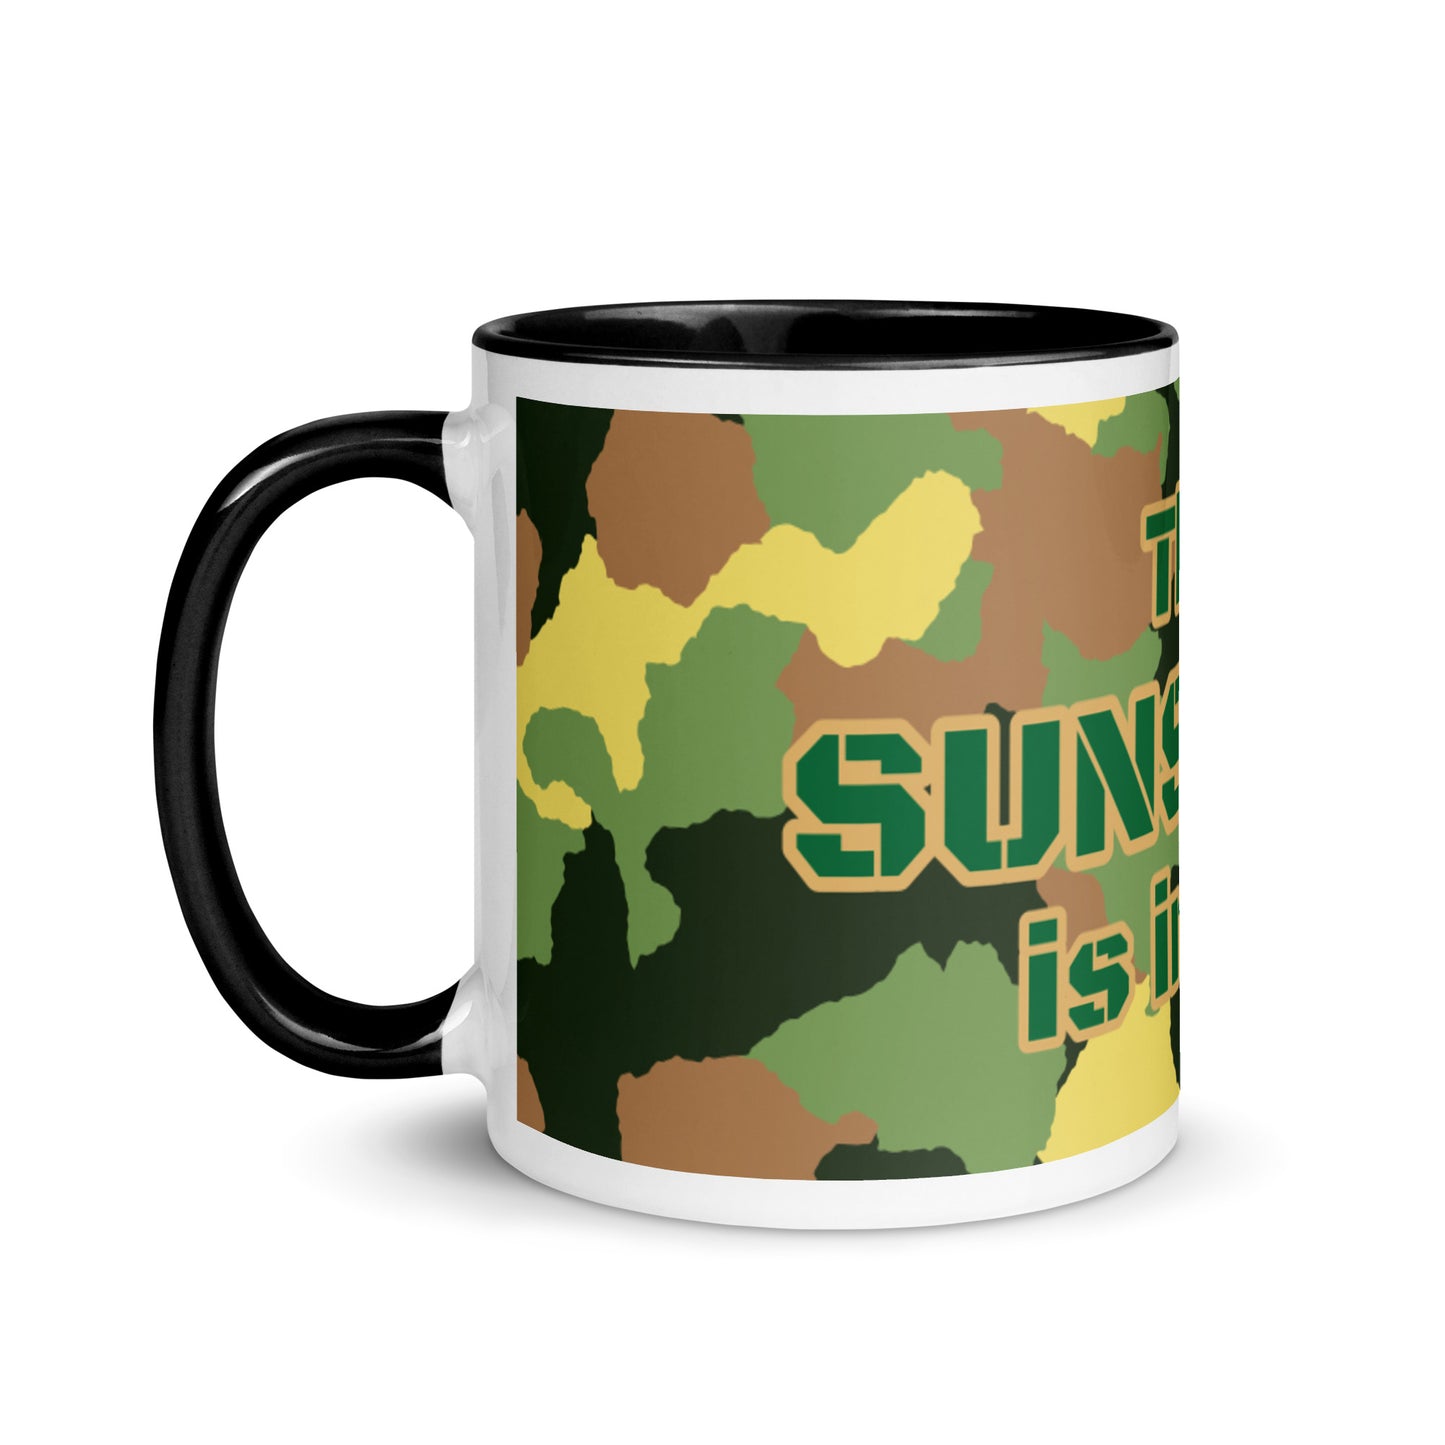 Army Camo Color Mug - The Sunshine is in me